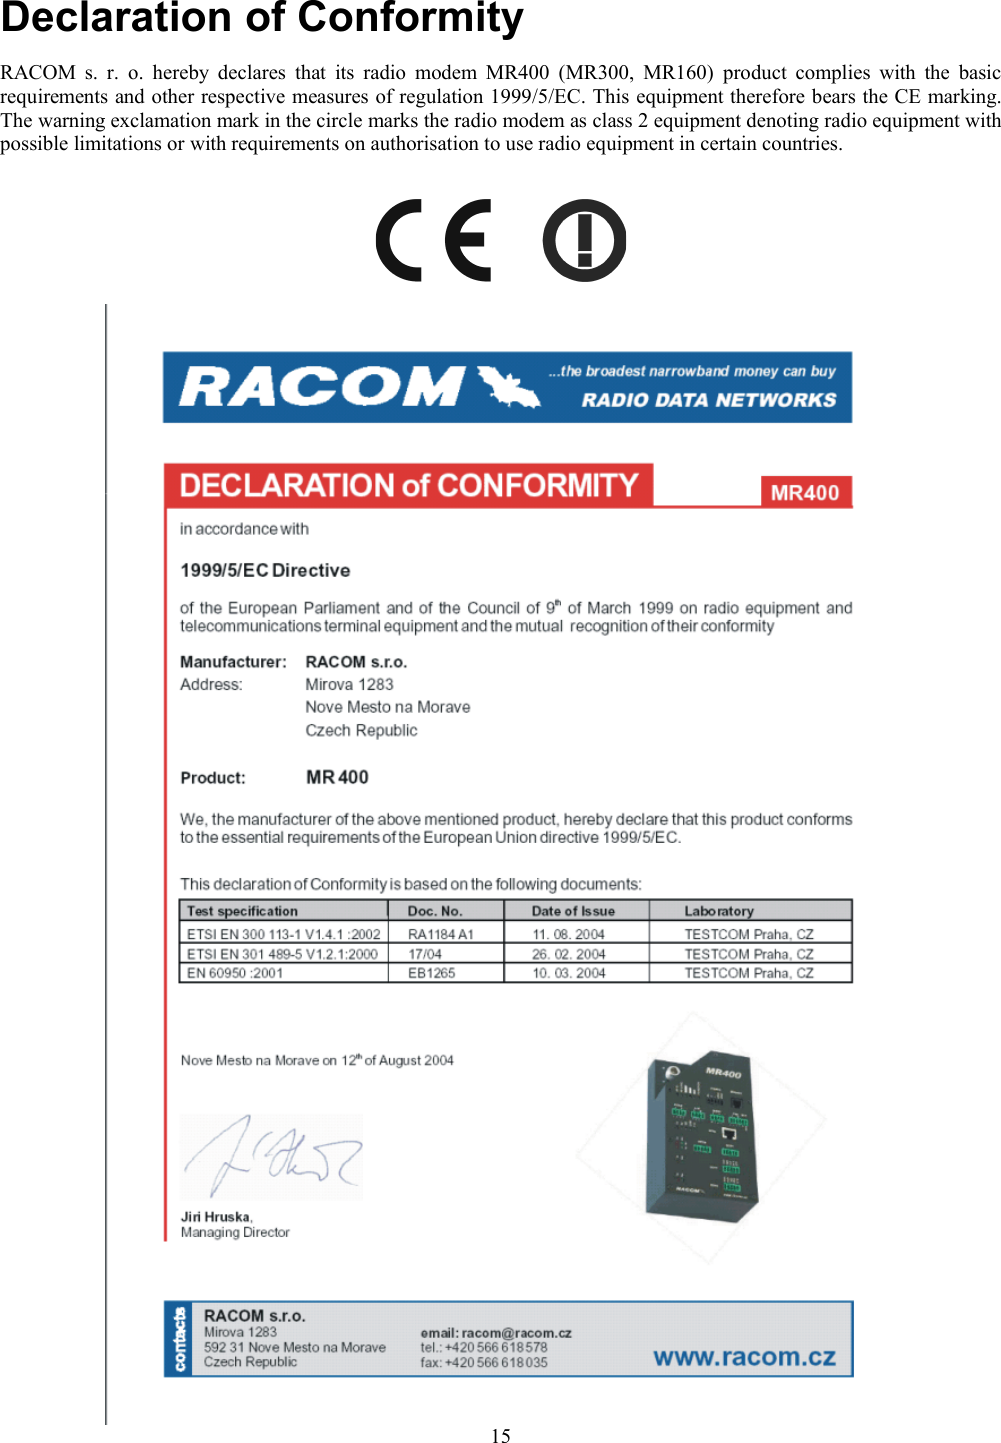 Declaration of ConformityRACOM  s. r. o. hereby declares that its radio modem MR400 (MR300, MR160) product complies with the  basicrequirements and other respective measures of regulation 1999/5/EC. This equipment therefore bears the CE marking.The warning exclamation mark in the circle marks the radio modem as class 2 equipment denoting radio equipment withpossible limitations or with requirements on authorisation to use radio equipment in certain countries.15